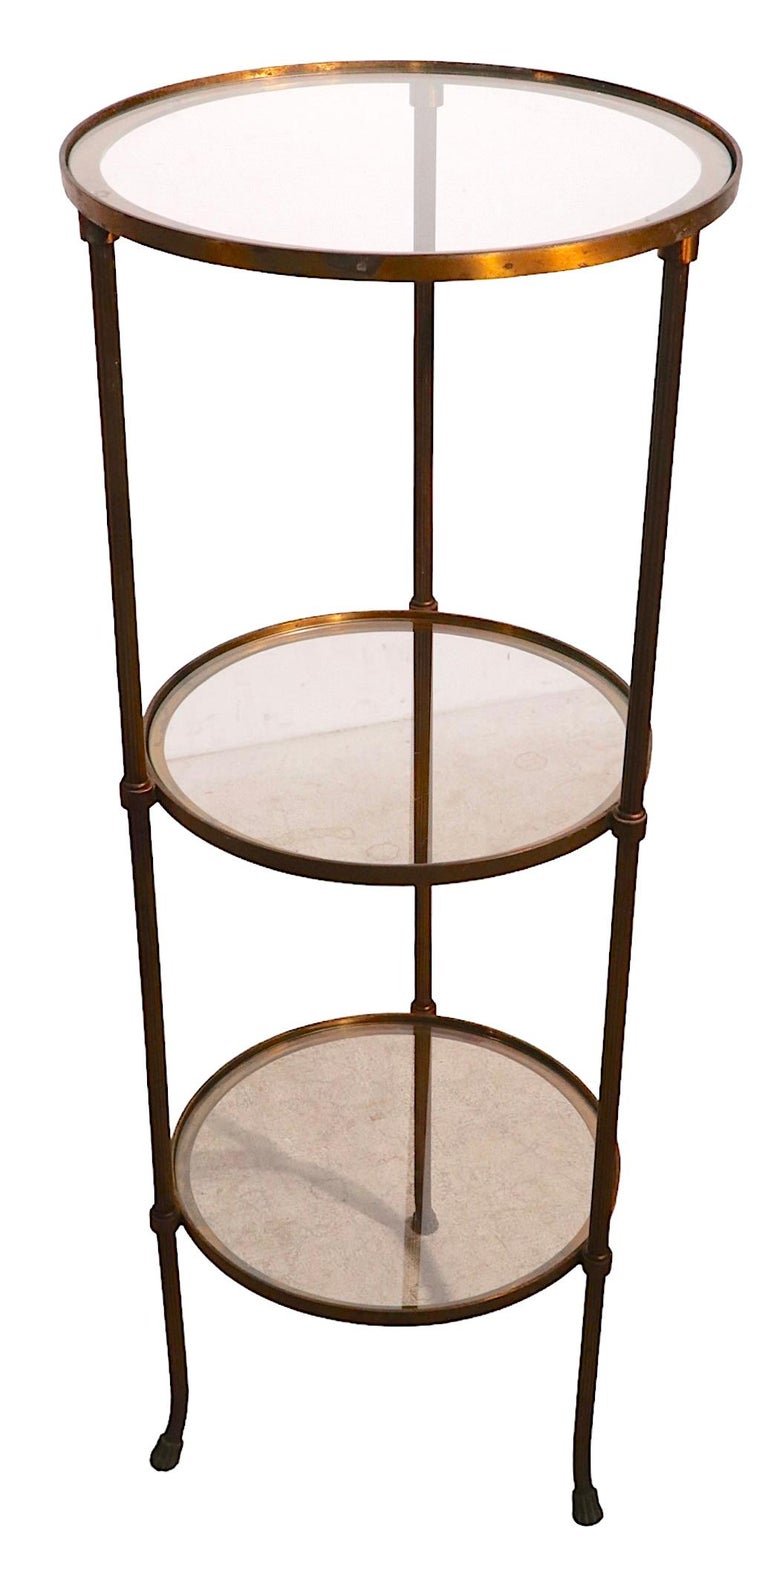 Three Tier Brass and Glass Etagere Display Shelf For Sale 1